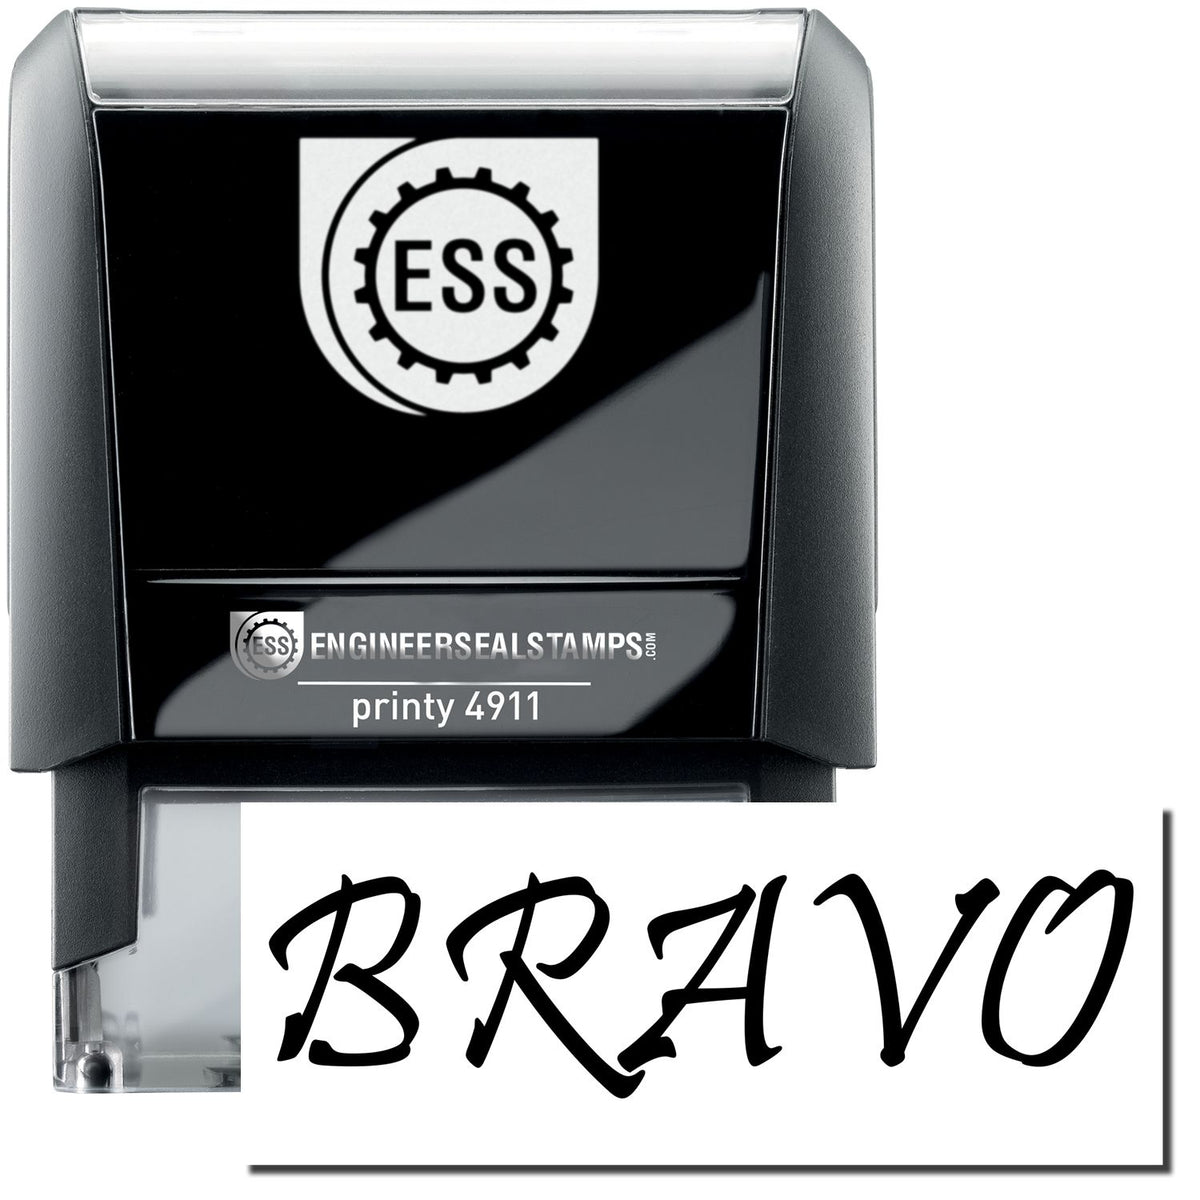 A self-inking stamp with a stamped image showing how the text &quot;BRAVO&quot;  is displayed after stamping.